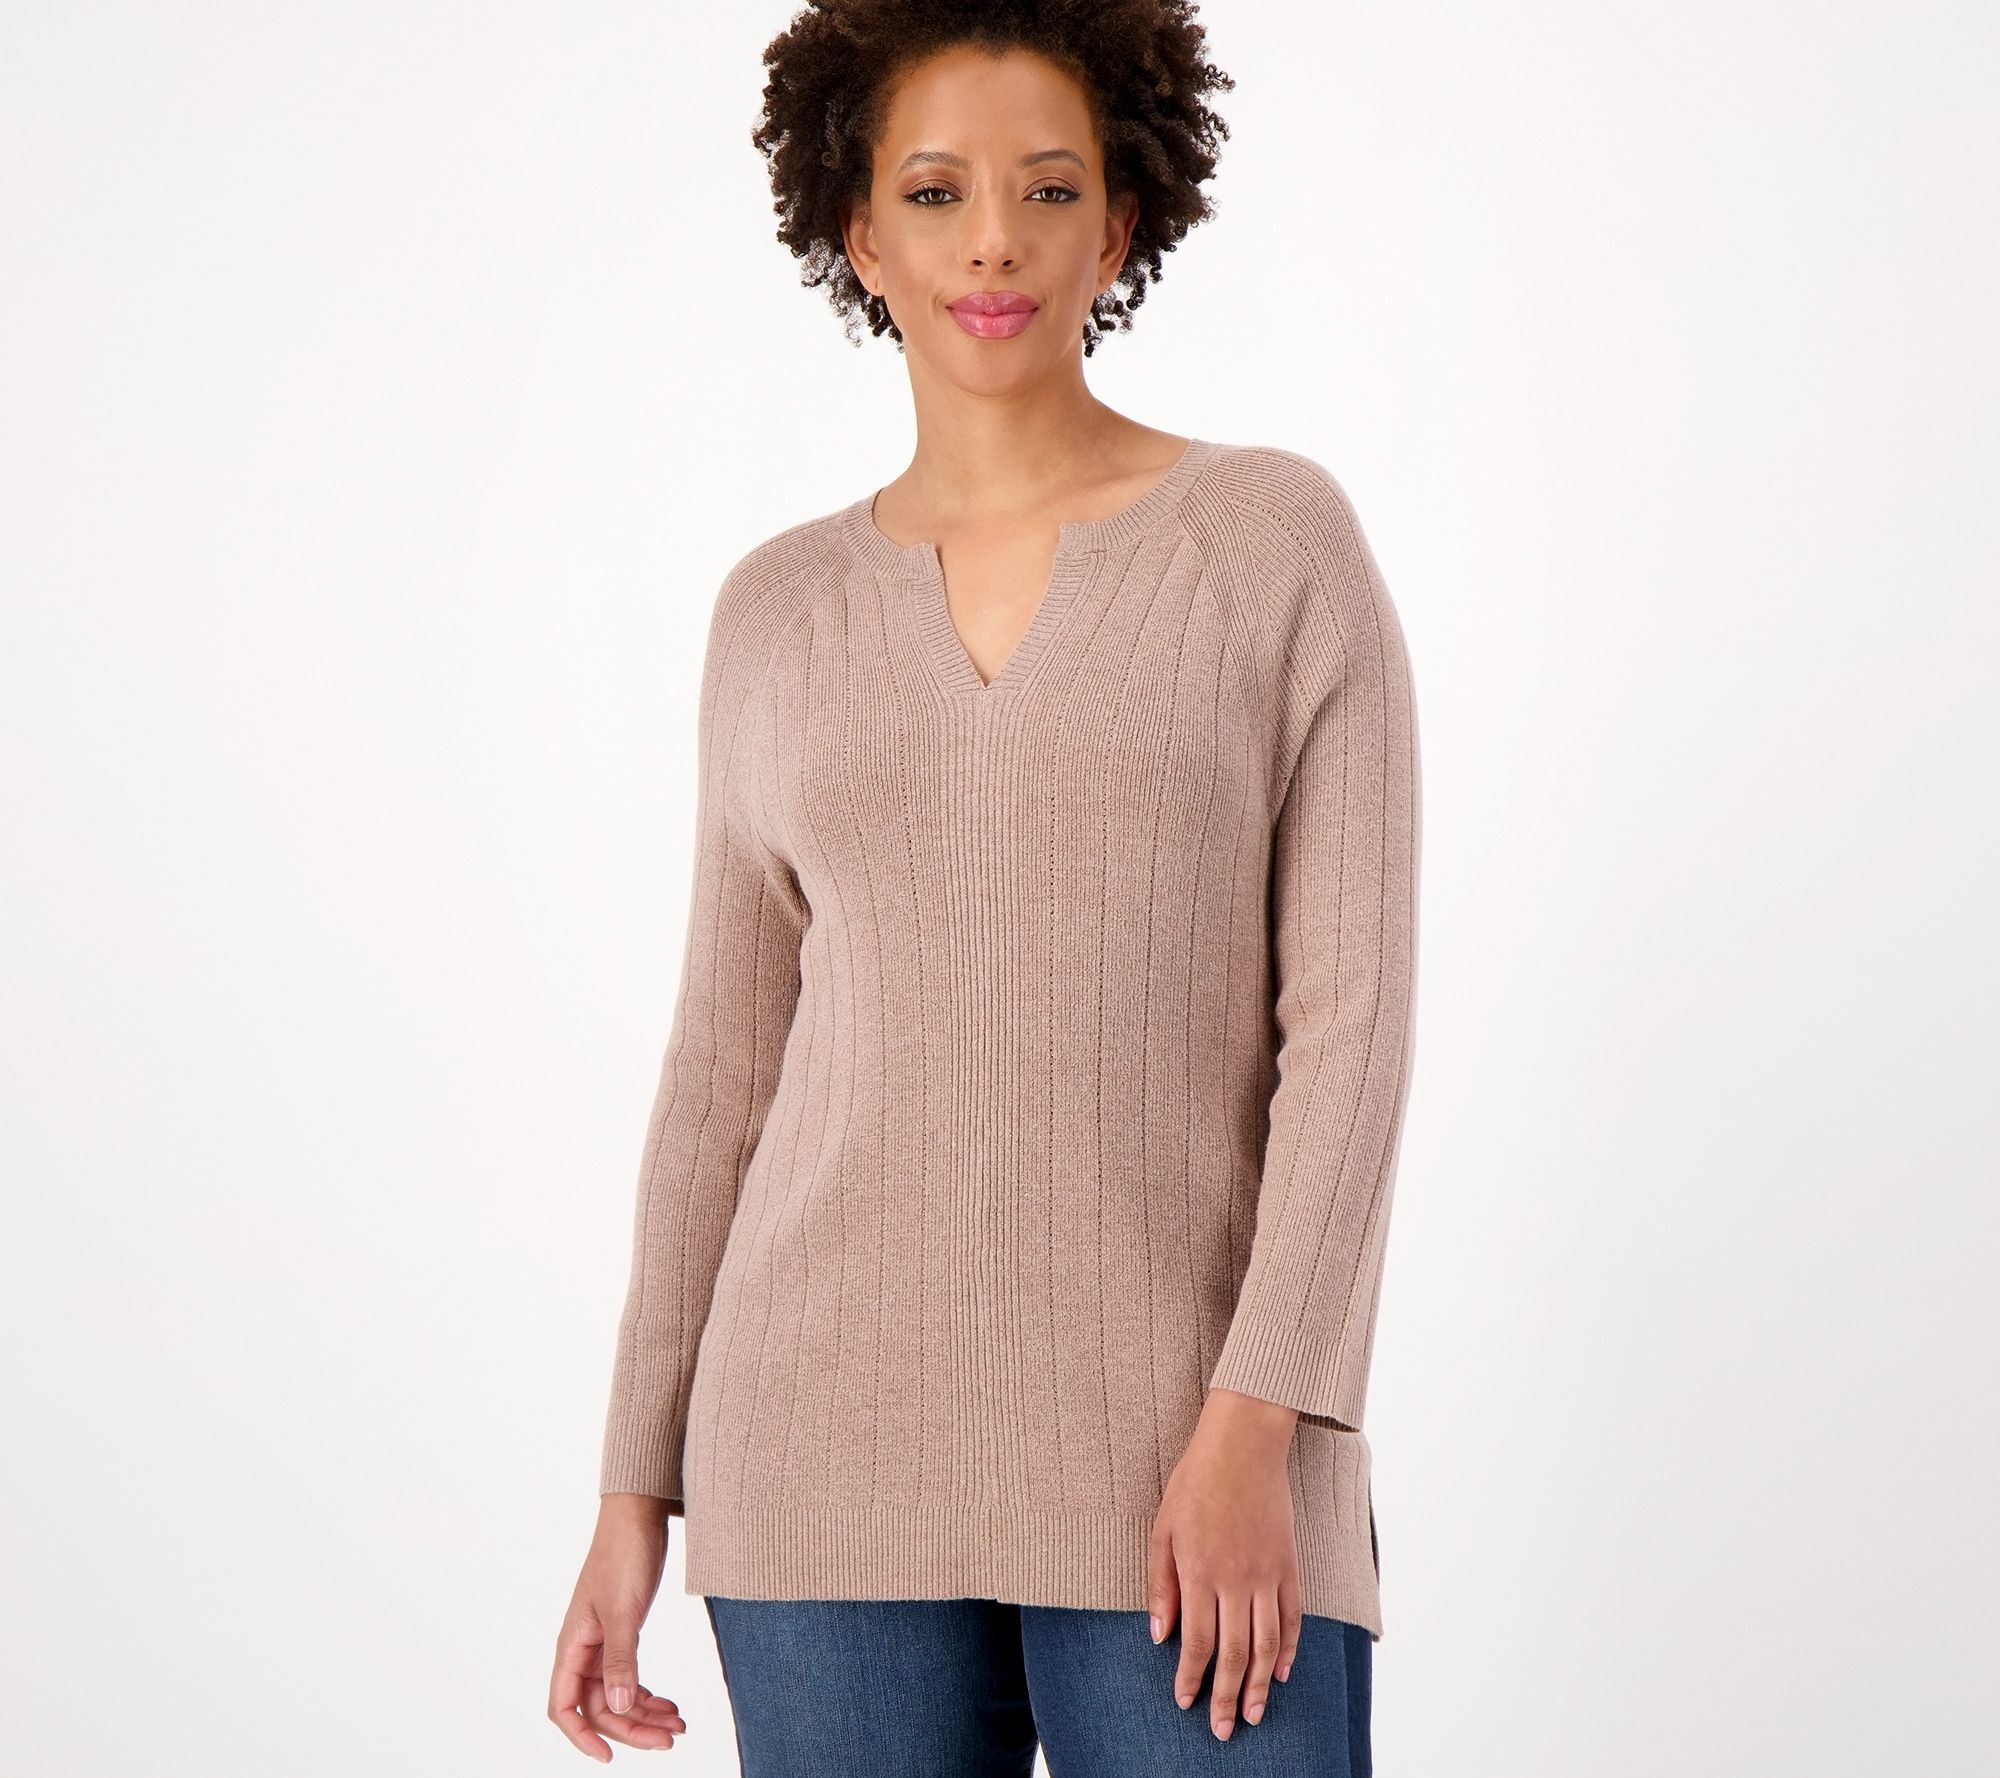 LOGO by Lori Goldstein Rayon Made From Bamboo Blend Sweater - QVC.com